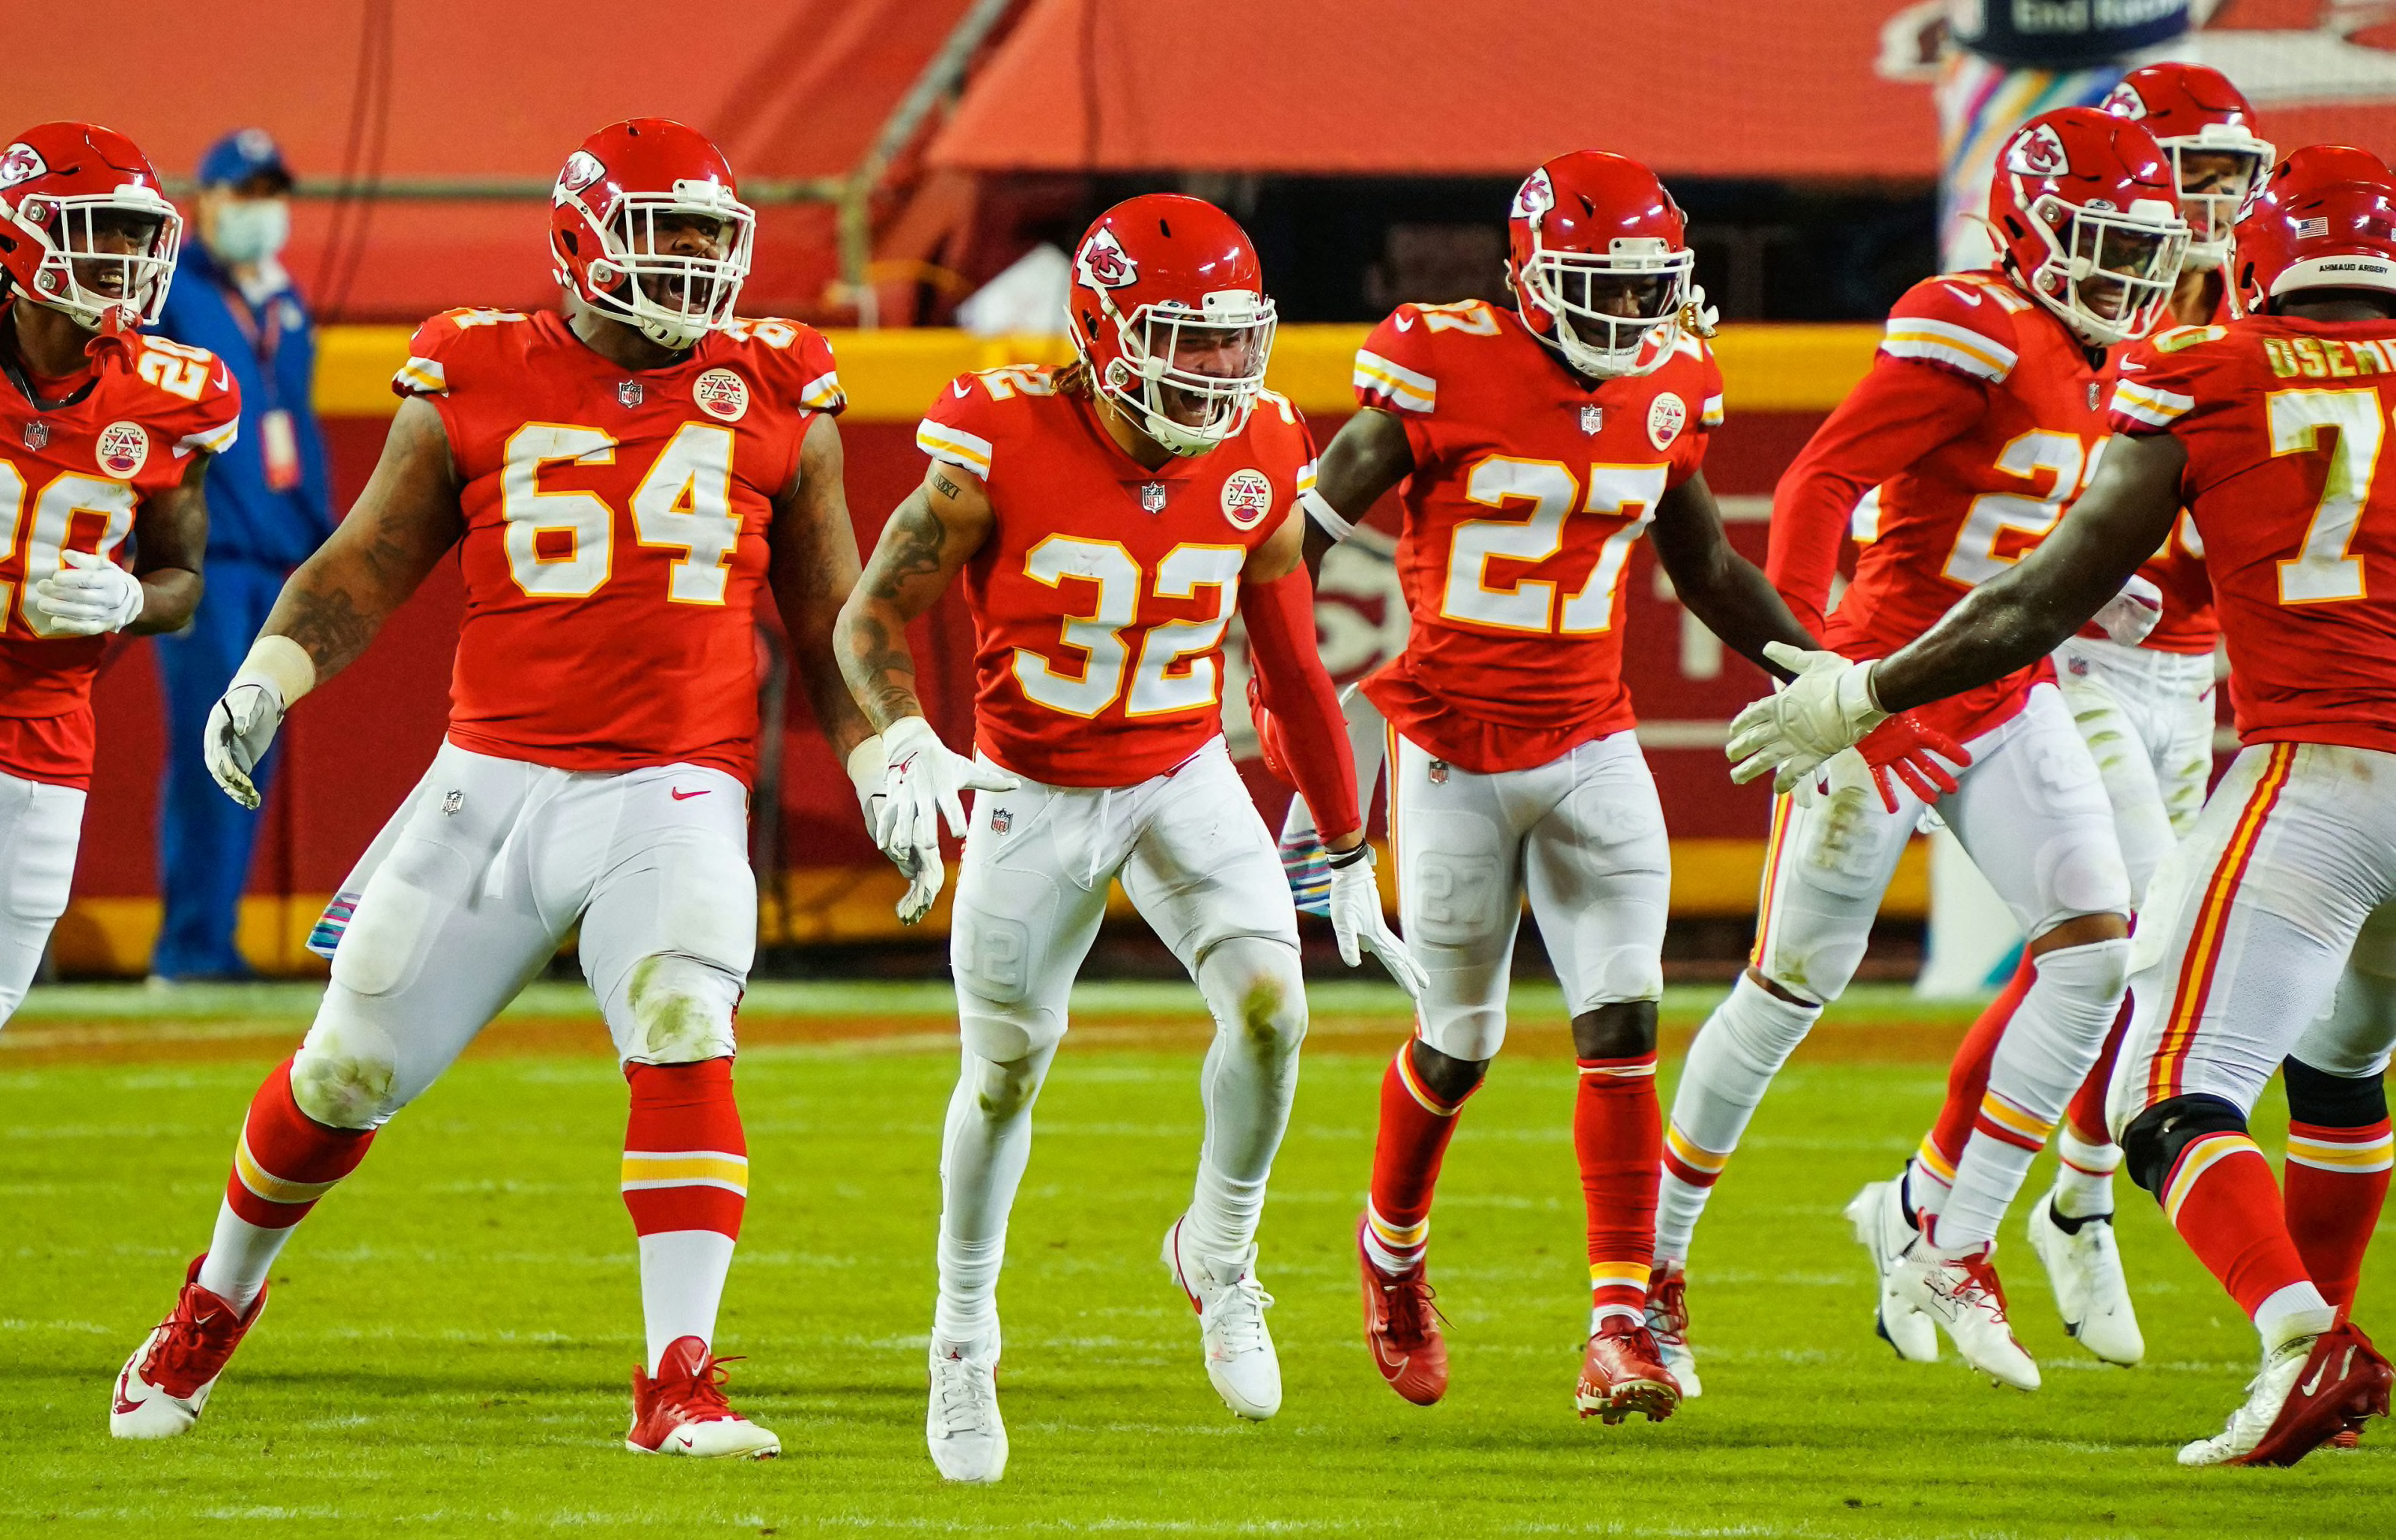 Chiefs Game Schedule : Printable 2020 2021 Kansas City Chiefs Schedule - 10 with the defending